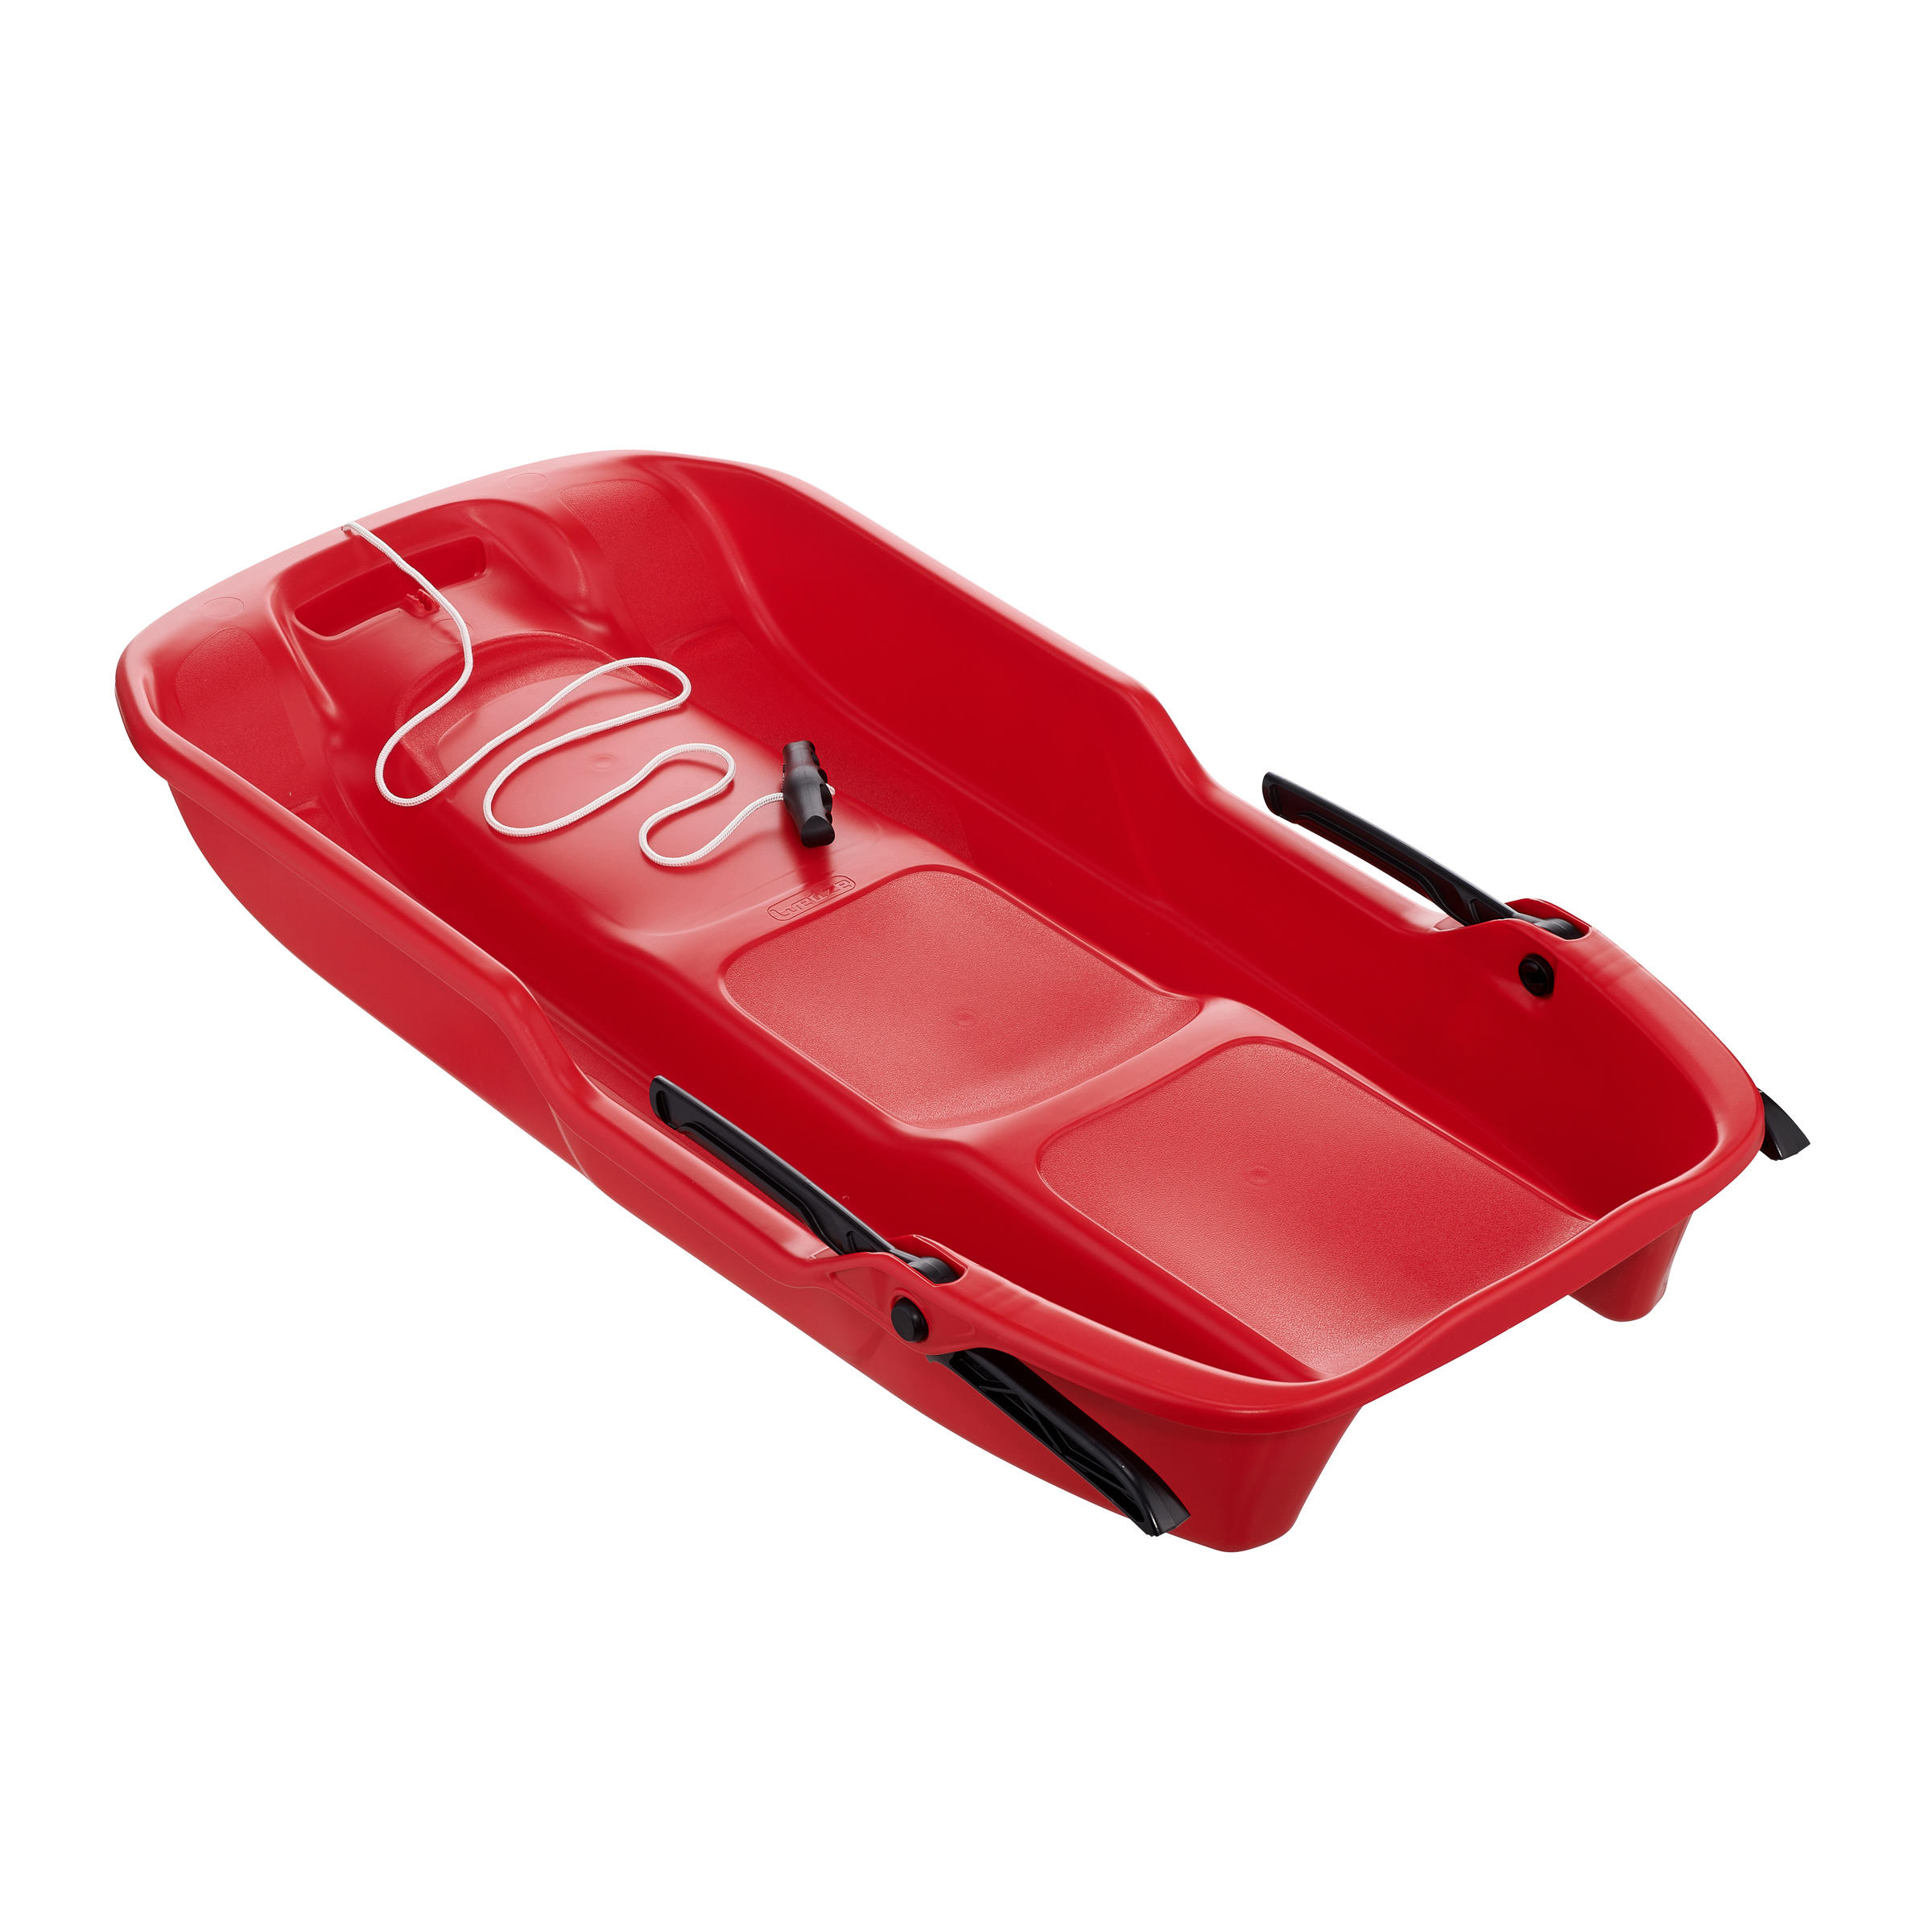 Adult Tray Sledge with Brakes - Red 2/6